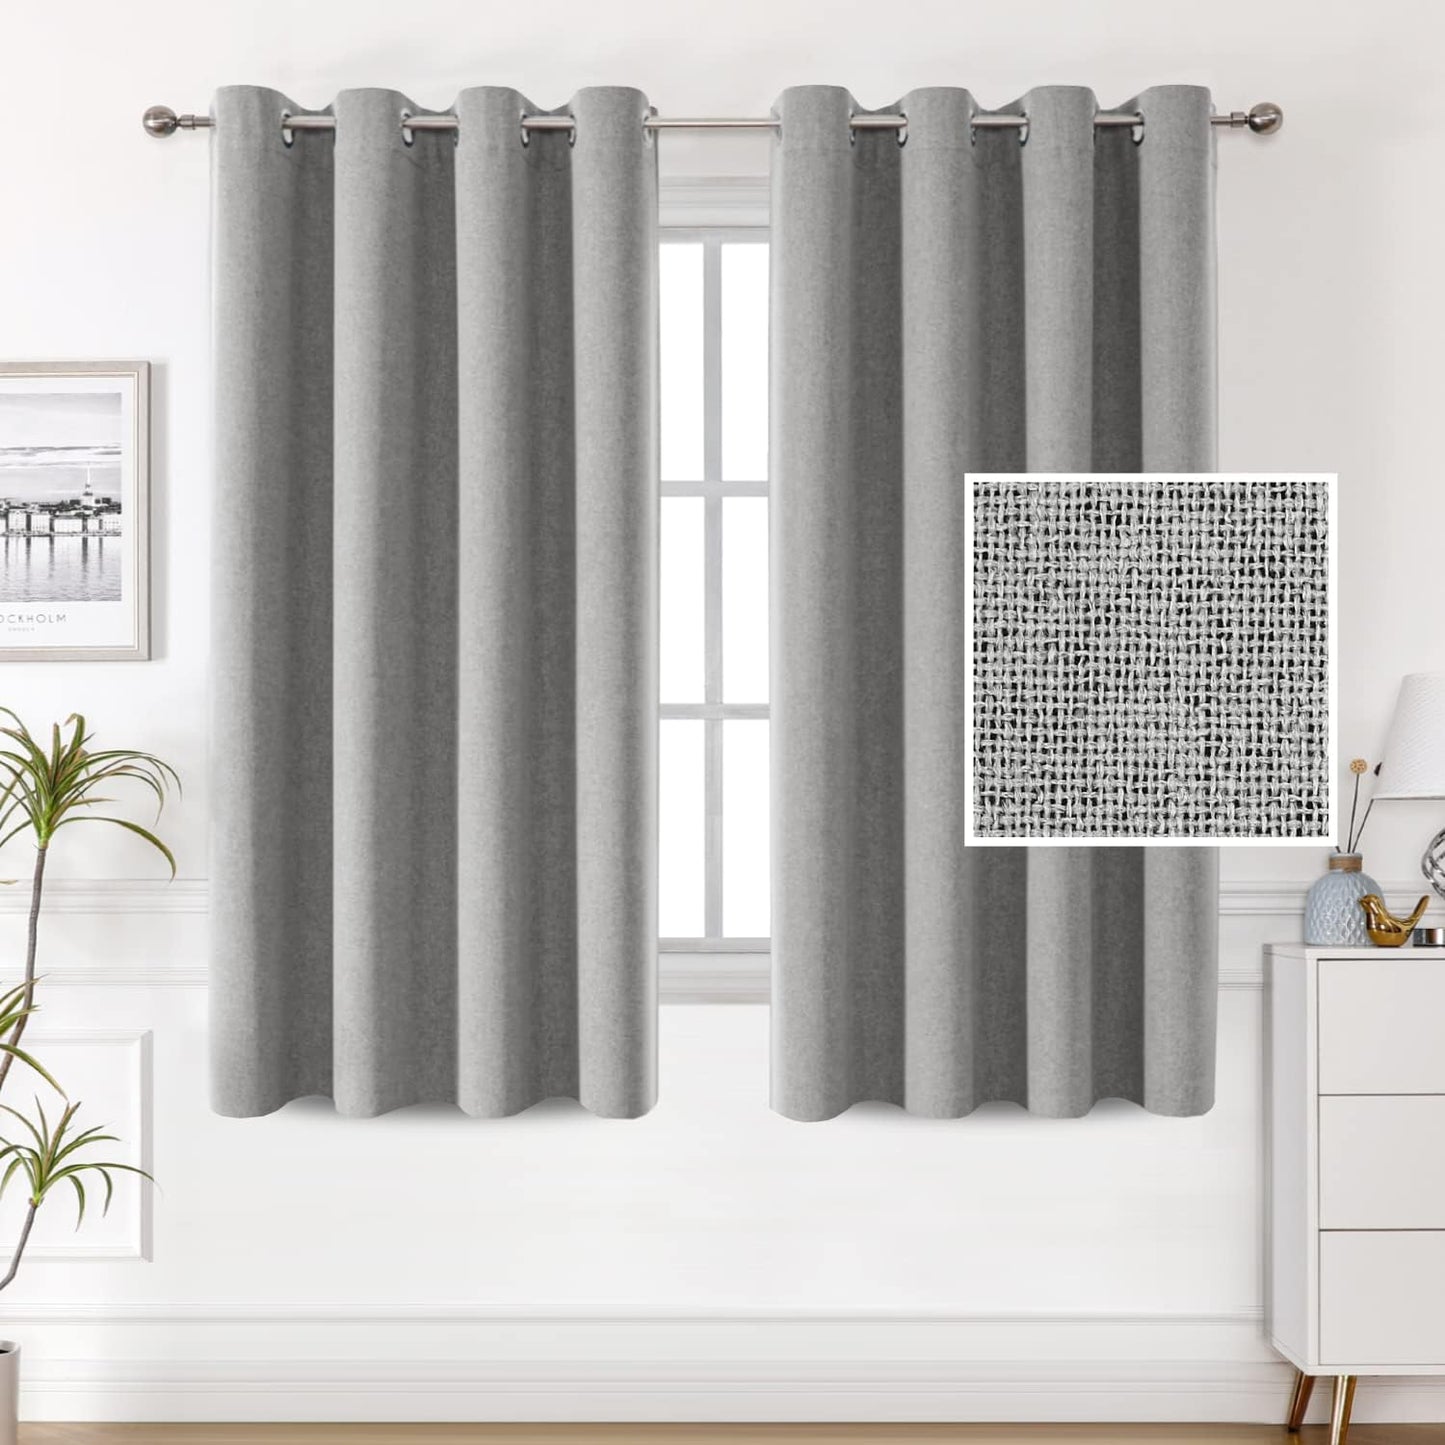 H.VERSAILTEX 100% Blackout Linen Look Curtains Thermal Insulated Curtains for Living Room Textured Burlap Drapes for Bedroom Grommet Linen Noise Blocking Curtains 42 X 84 Inch, 2 Panels - Off-White  H.VERSAILTEX Grey 52"W X 54"L 